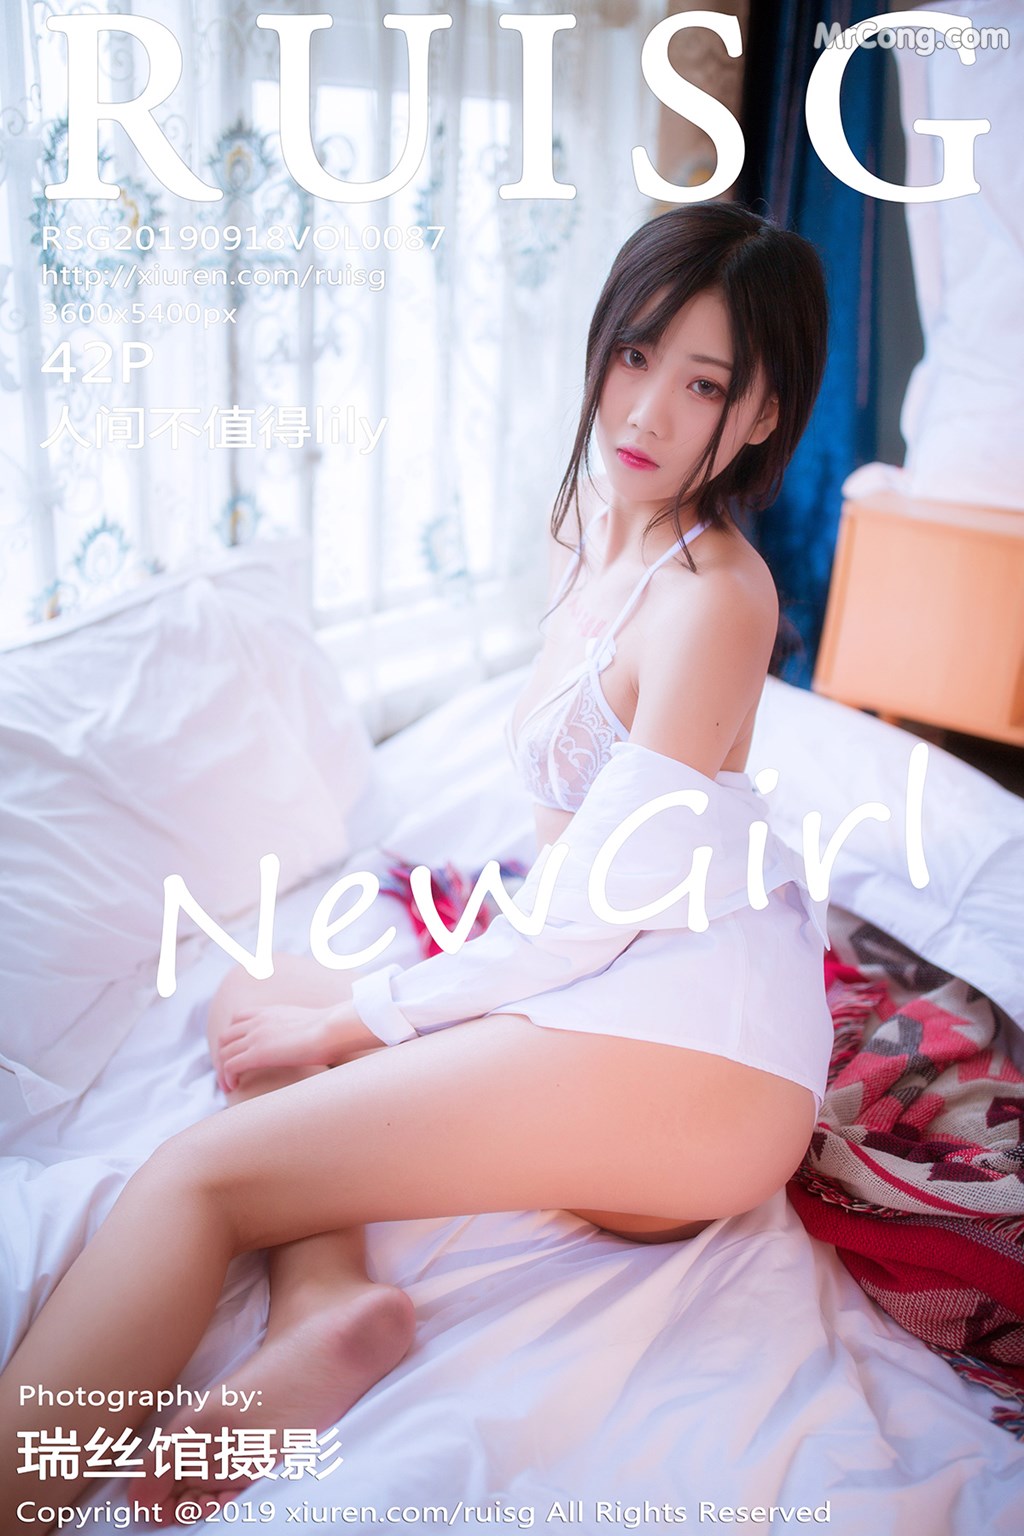 RuiSG Vol.087: 人间 不 值得 lily (43 pictures) photo 1-0